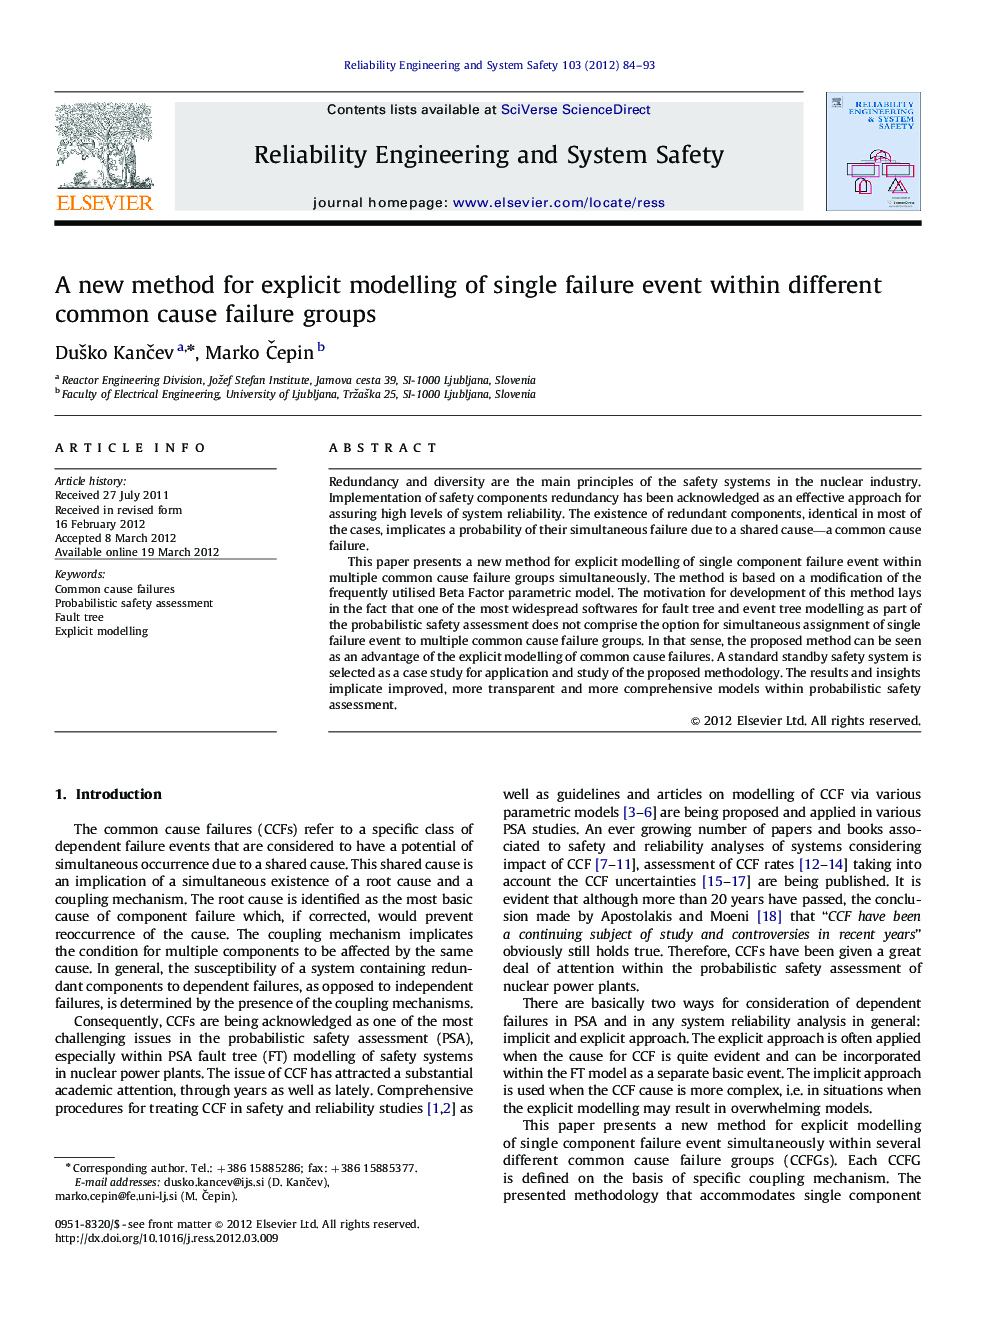 A new method for explicit modelling of single failure event within different common cause failure groups